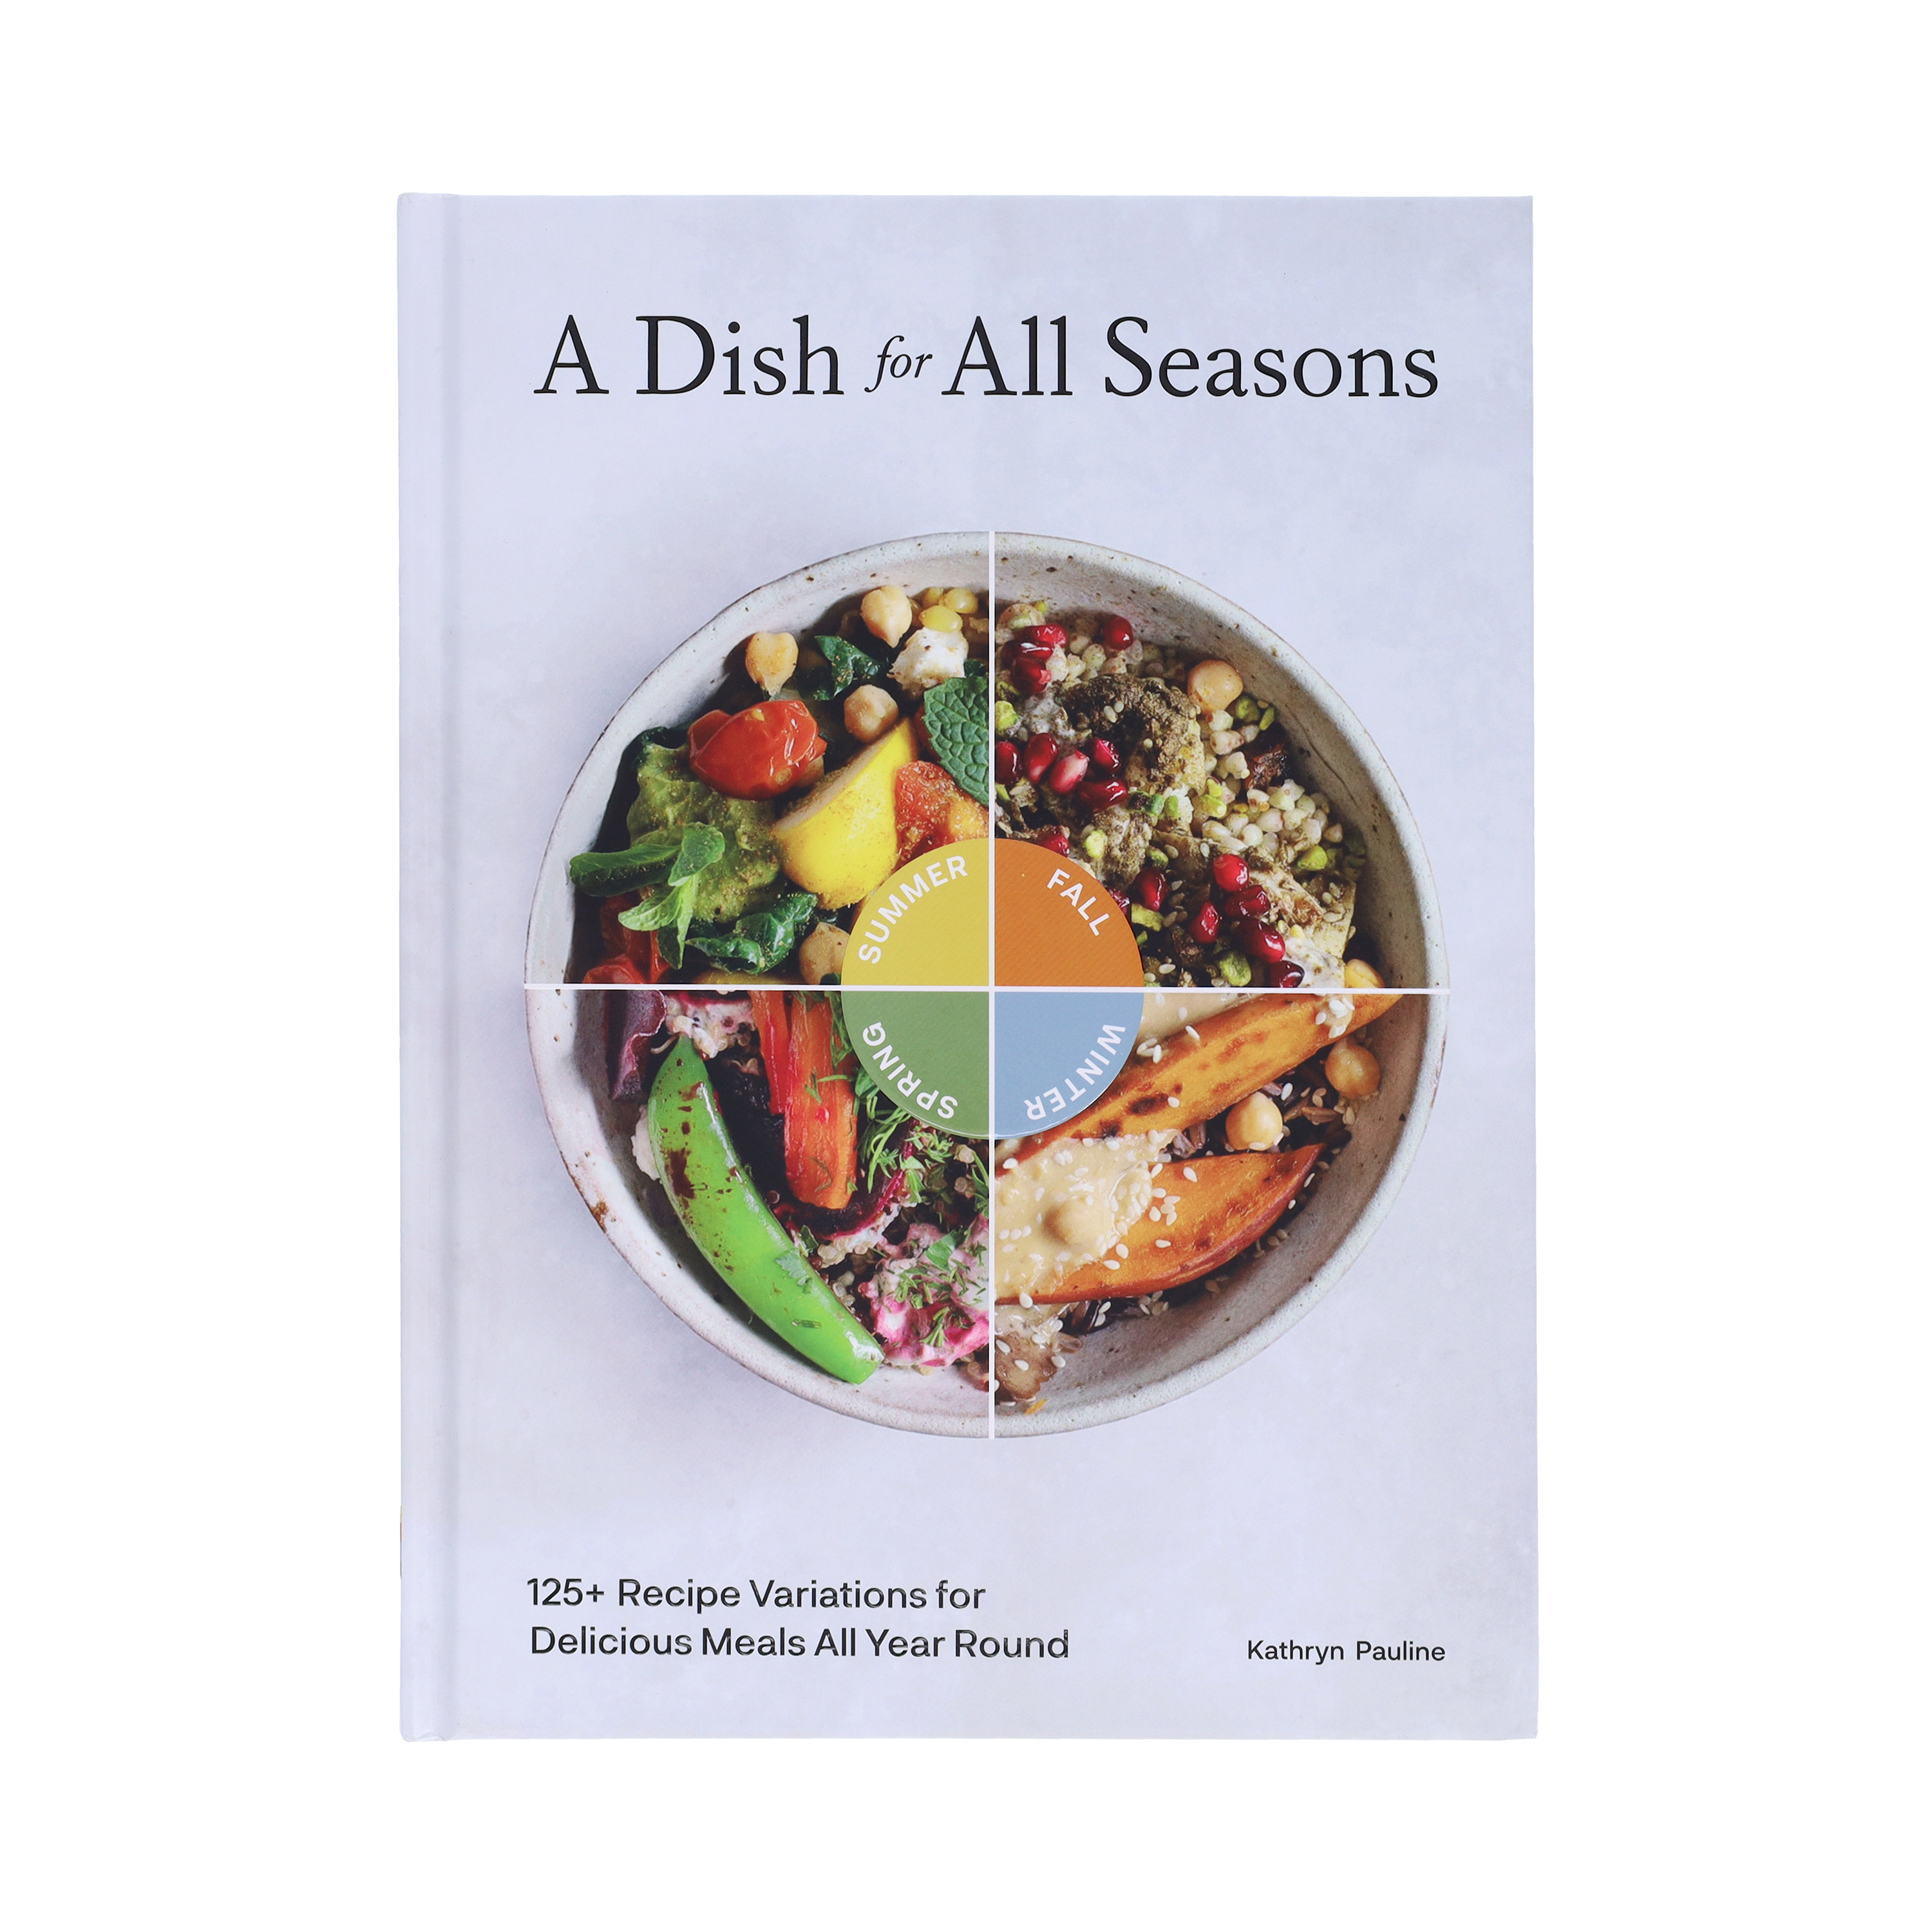 A Dish for All Seasons